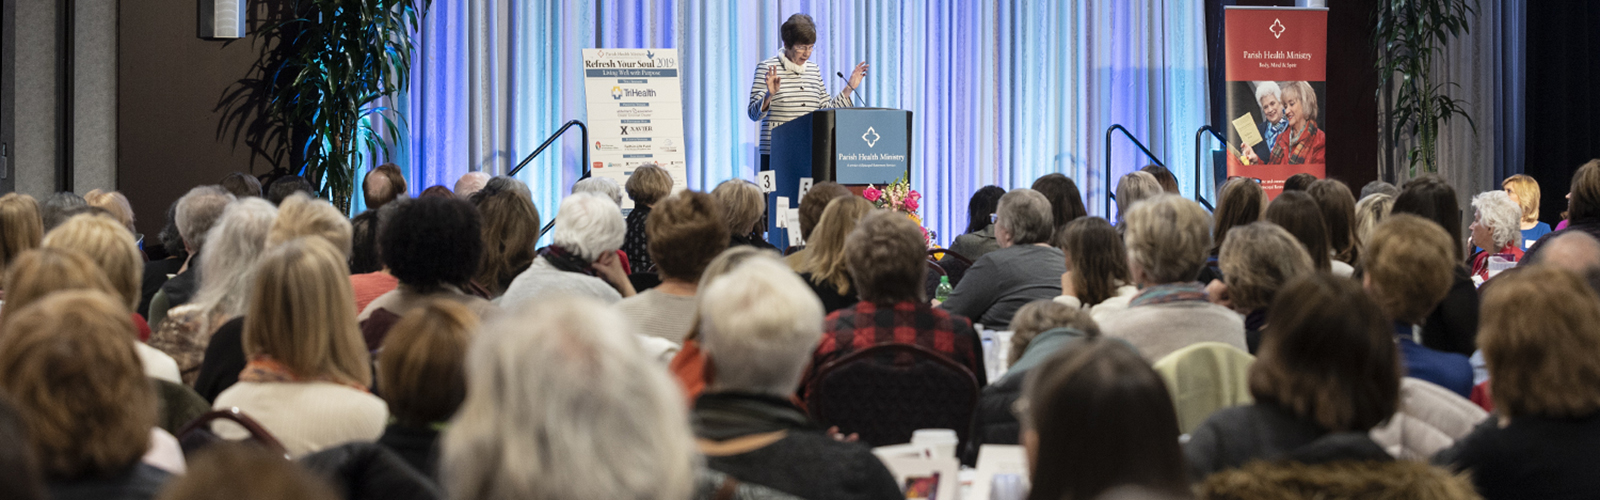 Keynote speaker Kathryn Spink, author of "Mother Teresa: The Complete Authorized Biography"